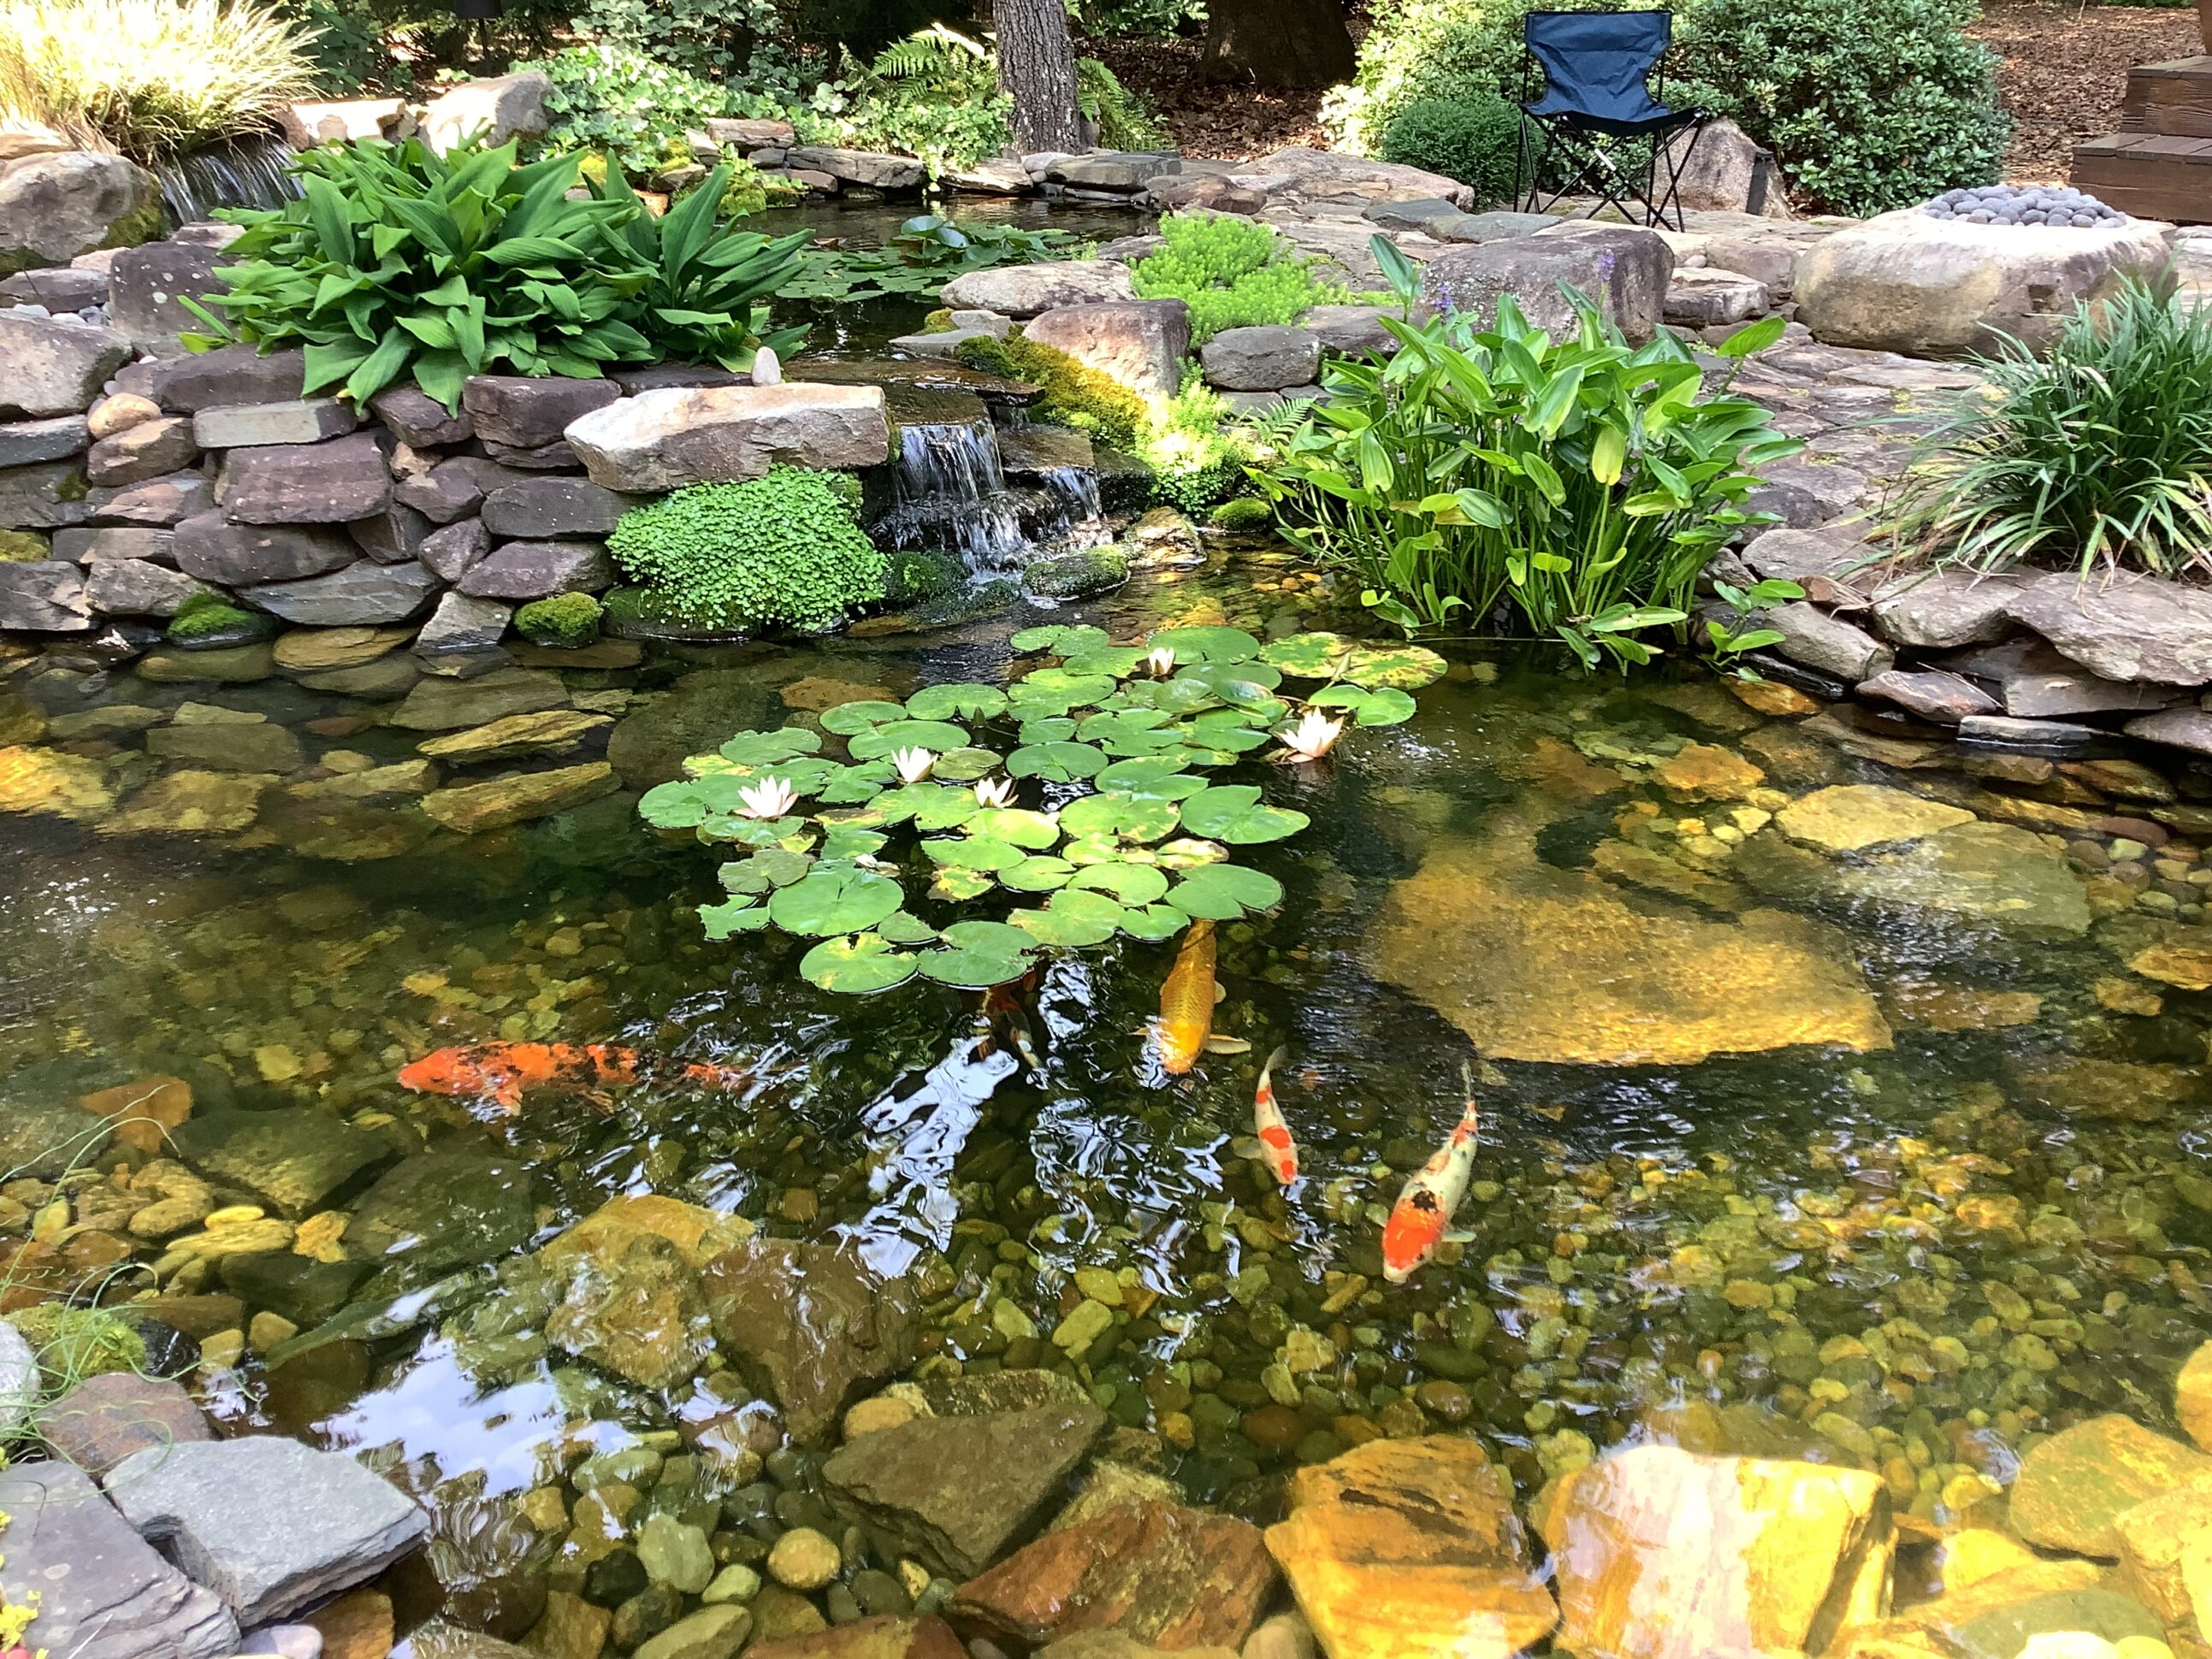 A pond with water lilies and rocks in it.